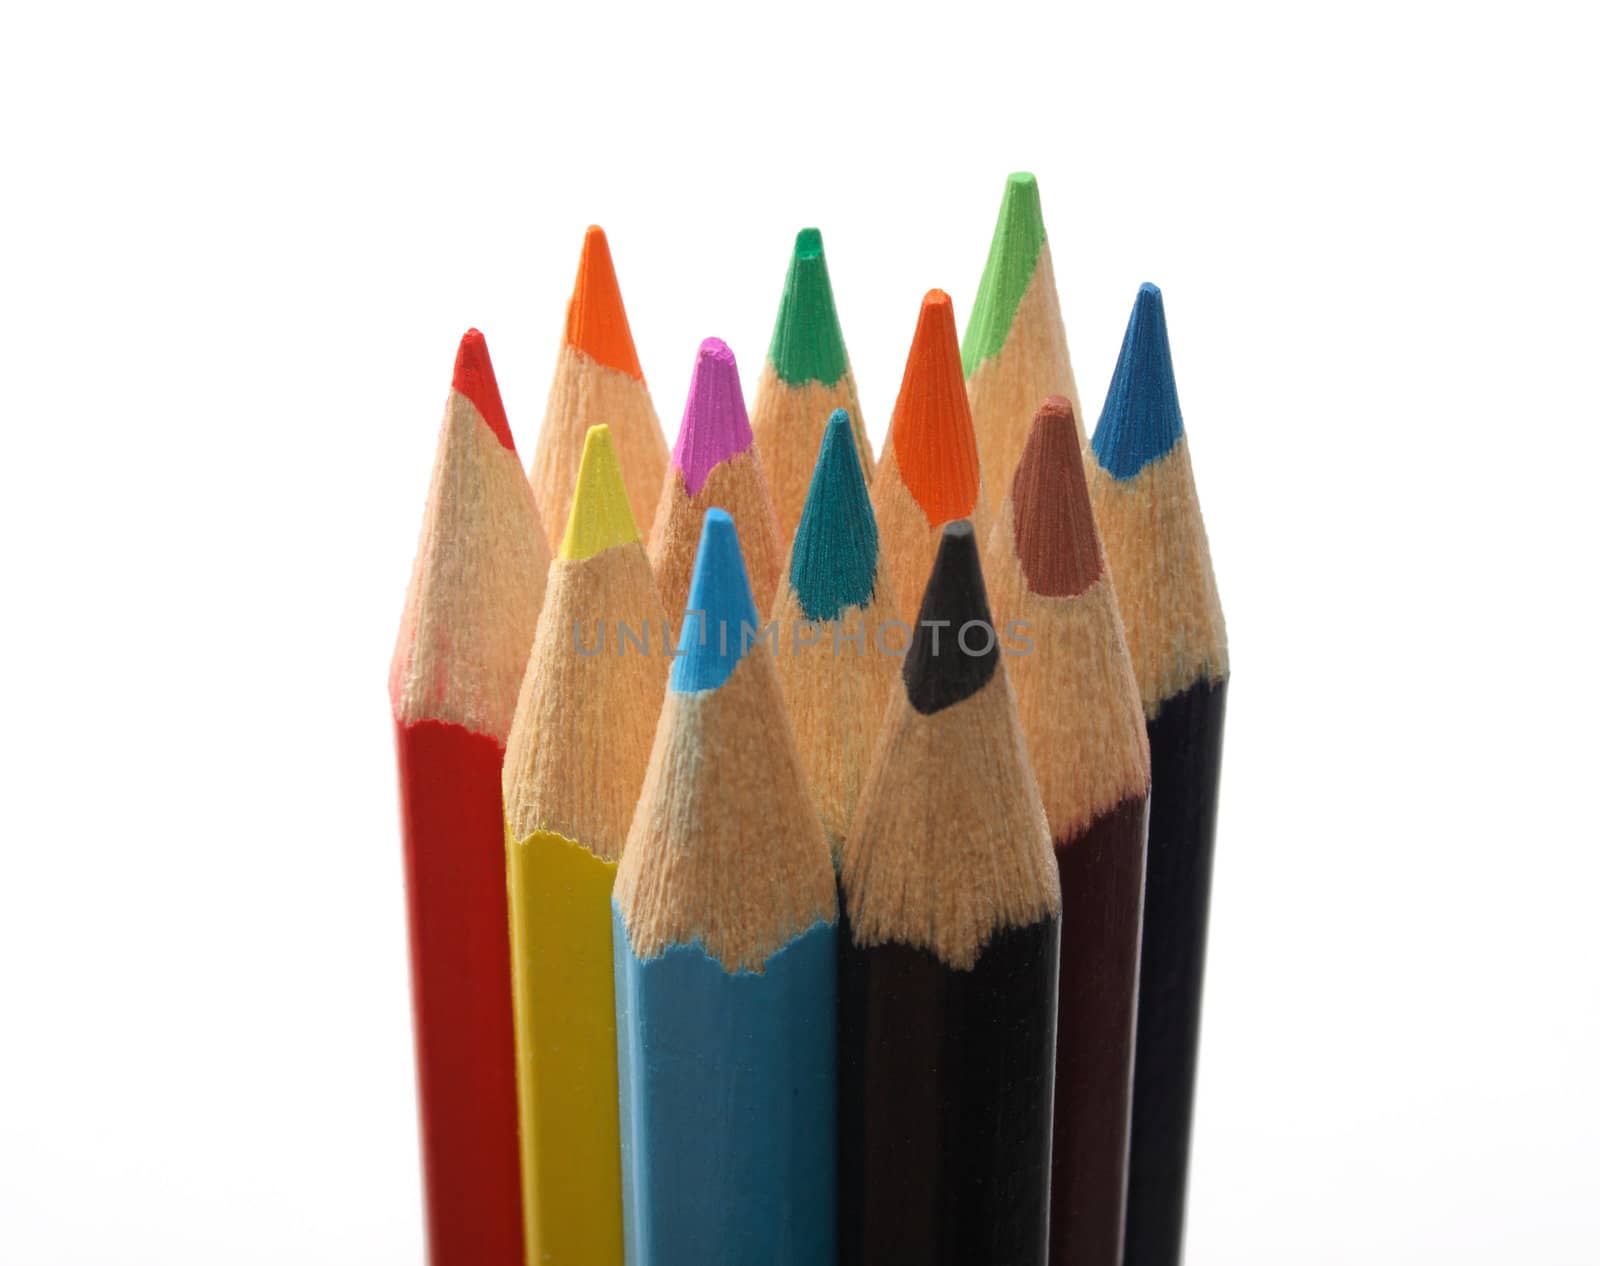 Set of colored wooden pencils upright over white